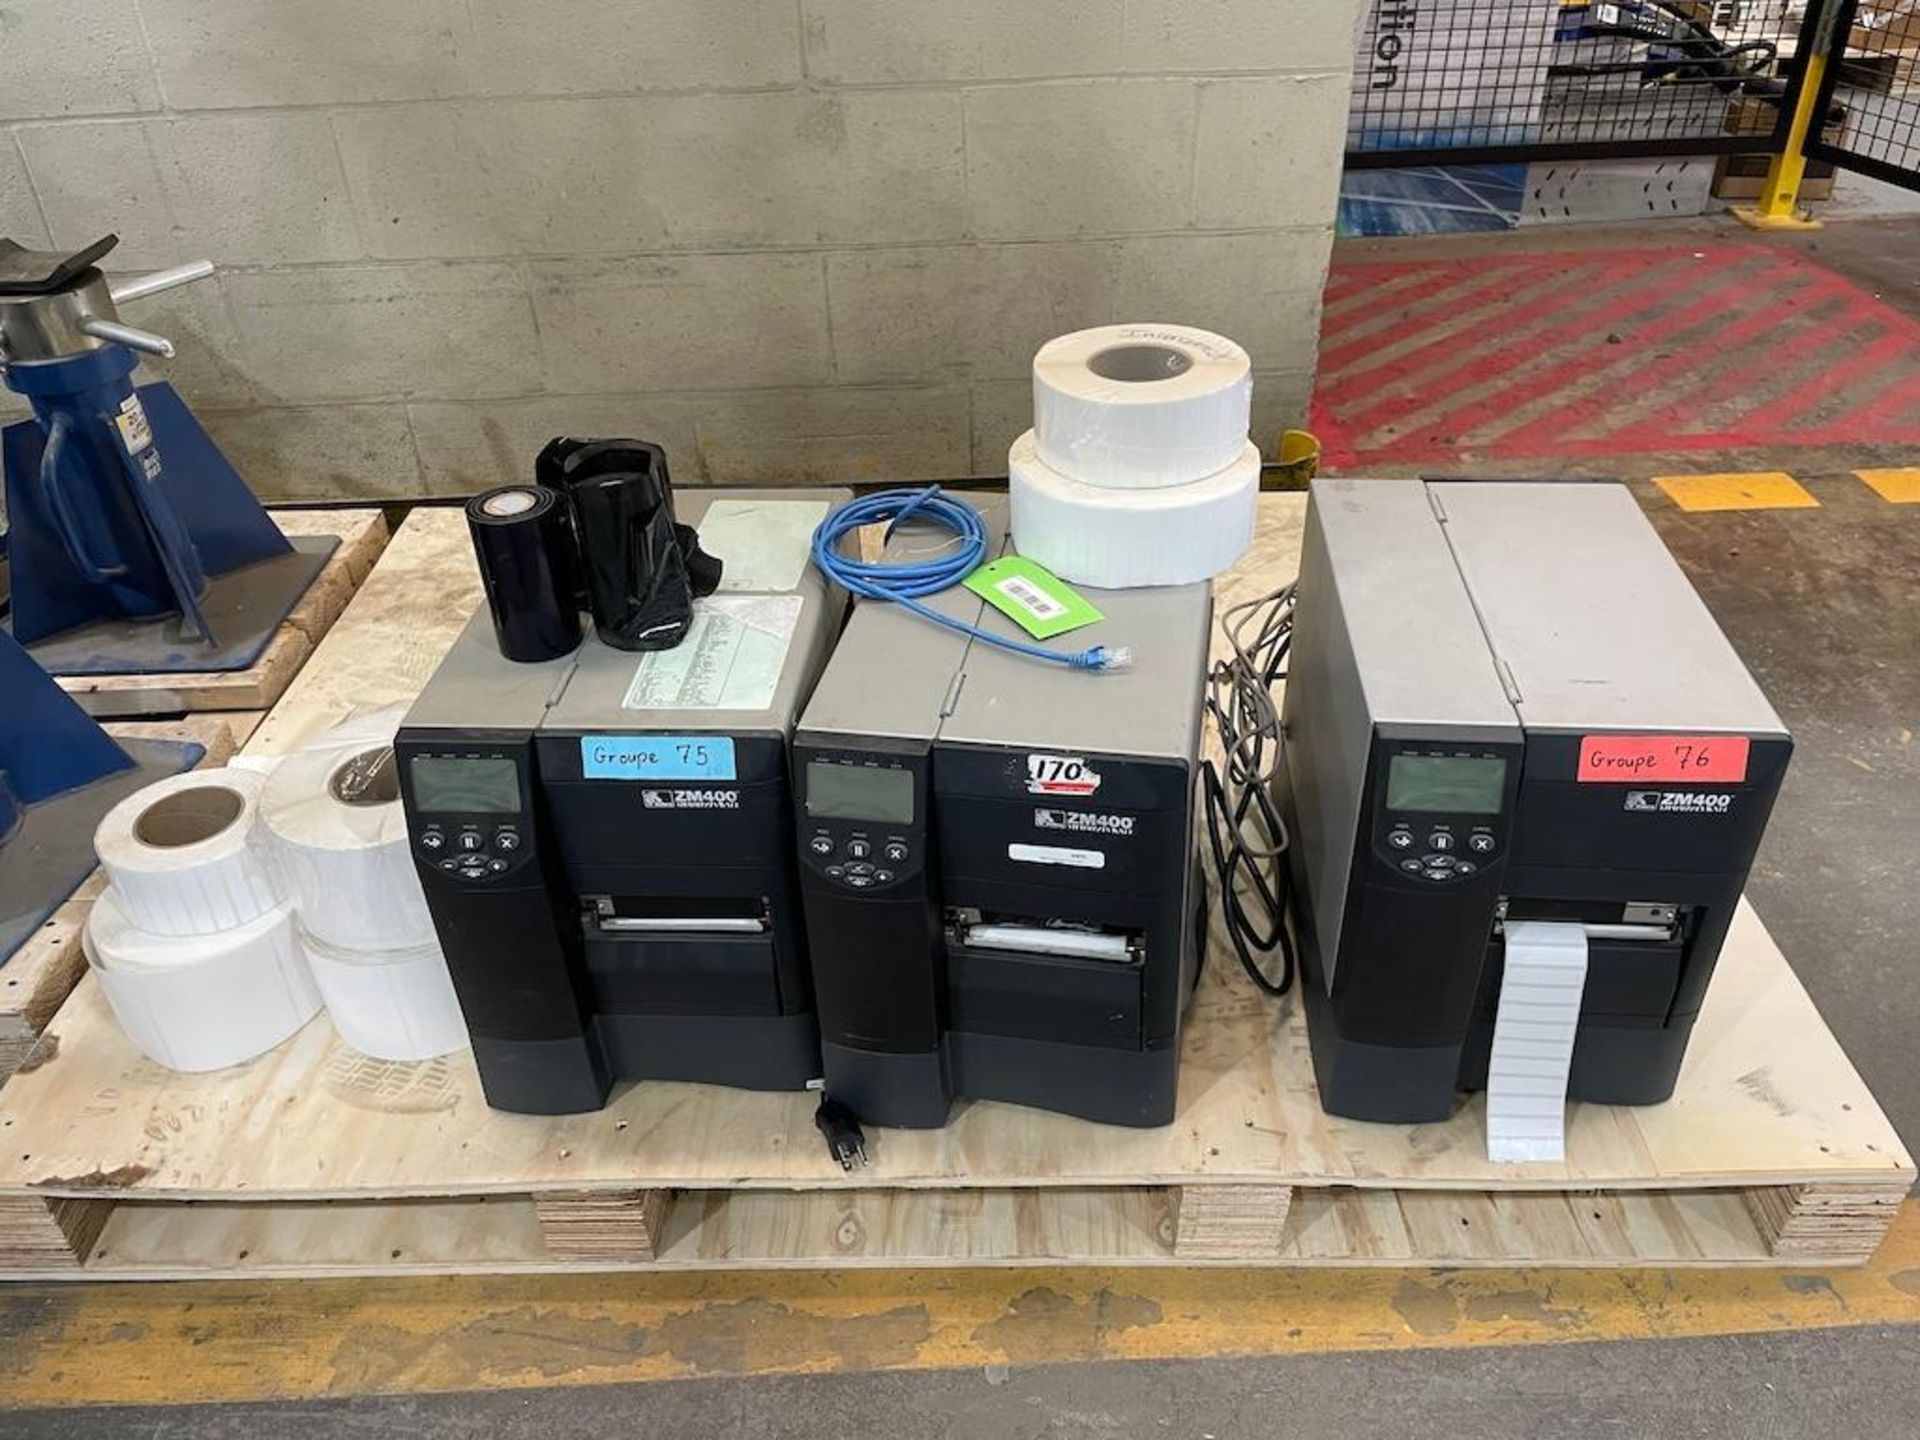 LOT (3) ZEBRA ZM400 LABEL PRINTERS W LABELS [TROIS RIVIERES] *PLEASE NOTE, EXCLUSIVE RIGGING FEE OF